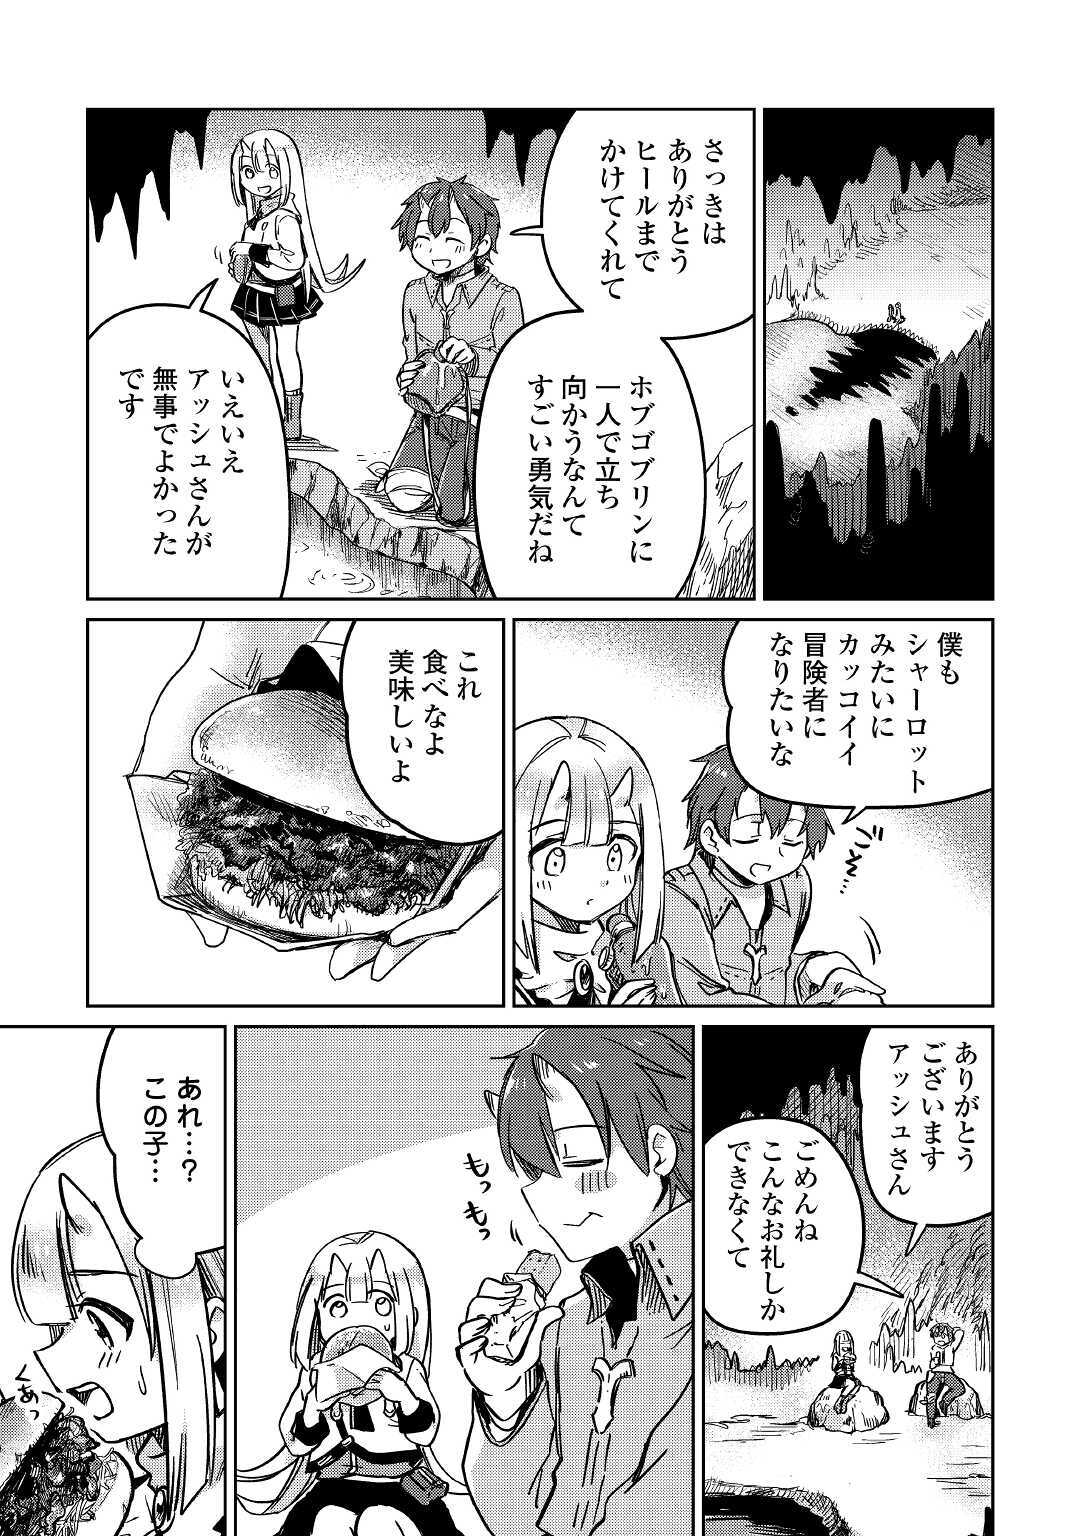 The Former Structural Researcher’s Story of Otherworldly Adventure 第28話 - Page 21